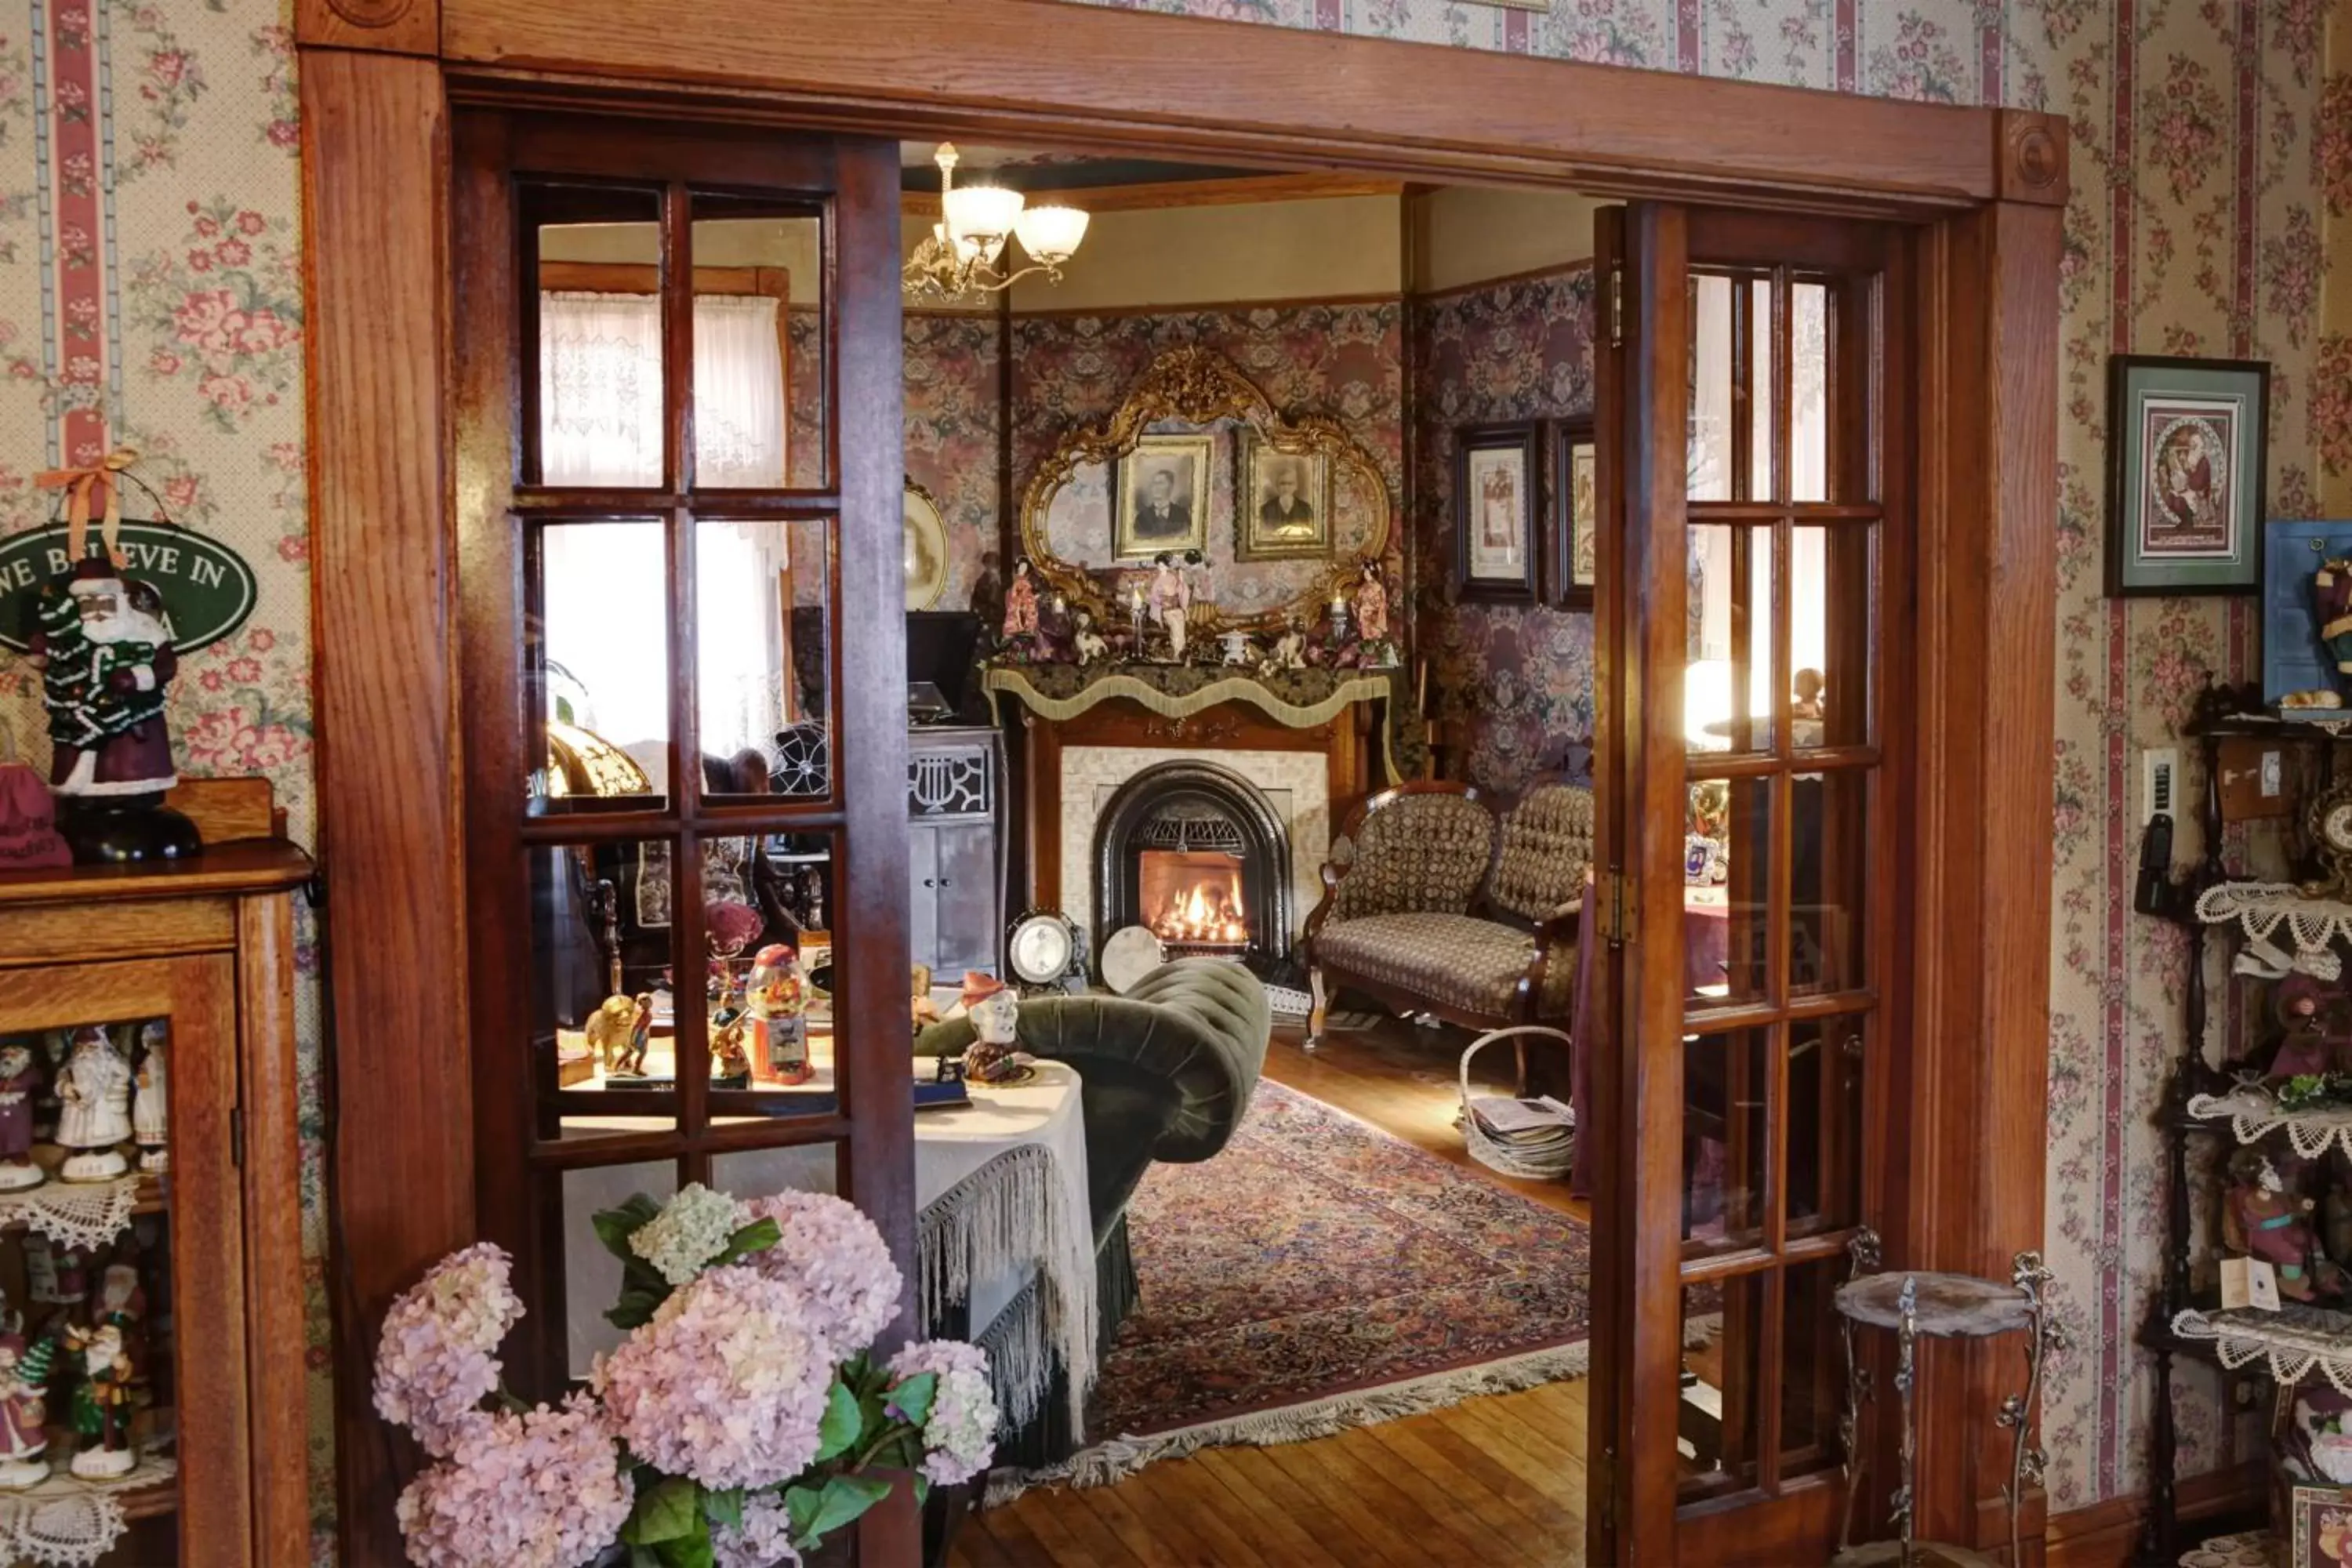 Area and facilities in The Queen, A Victorian Bed & Breakfast